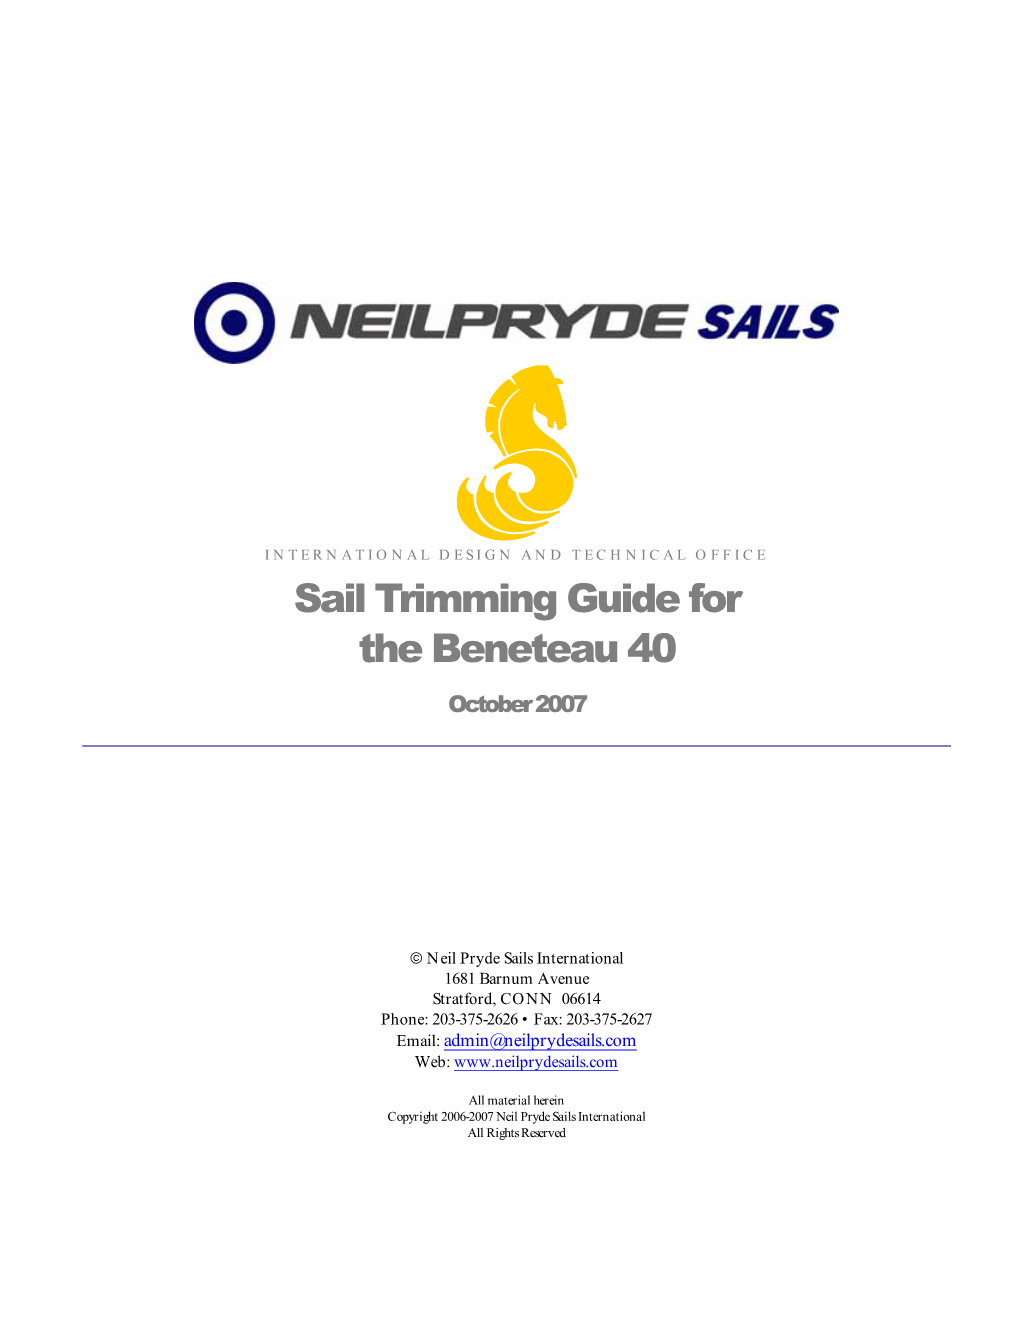 Sail Trimming Guide for the Beneteau 40 October 2007